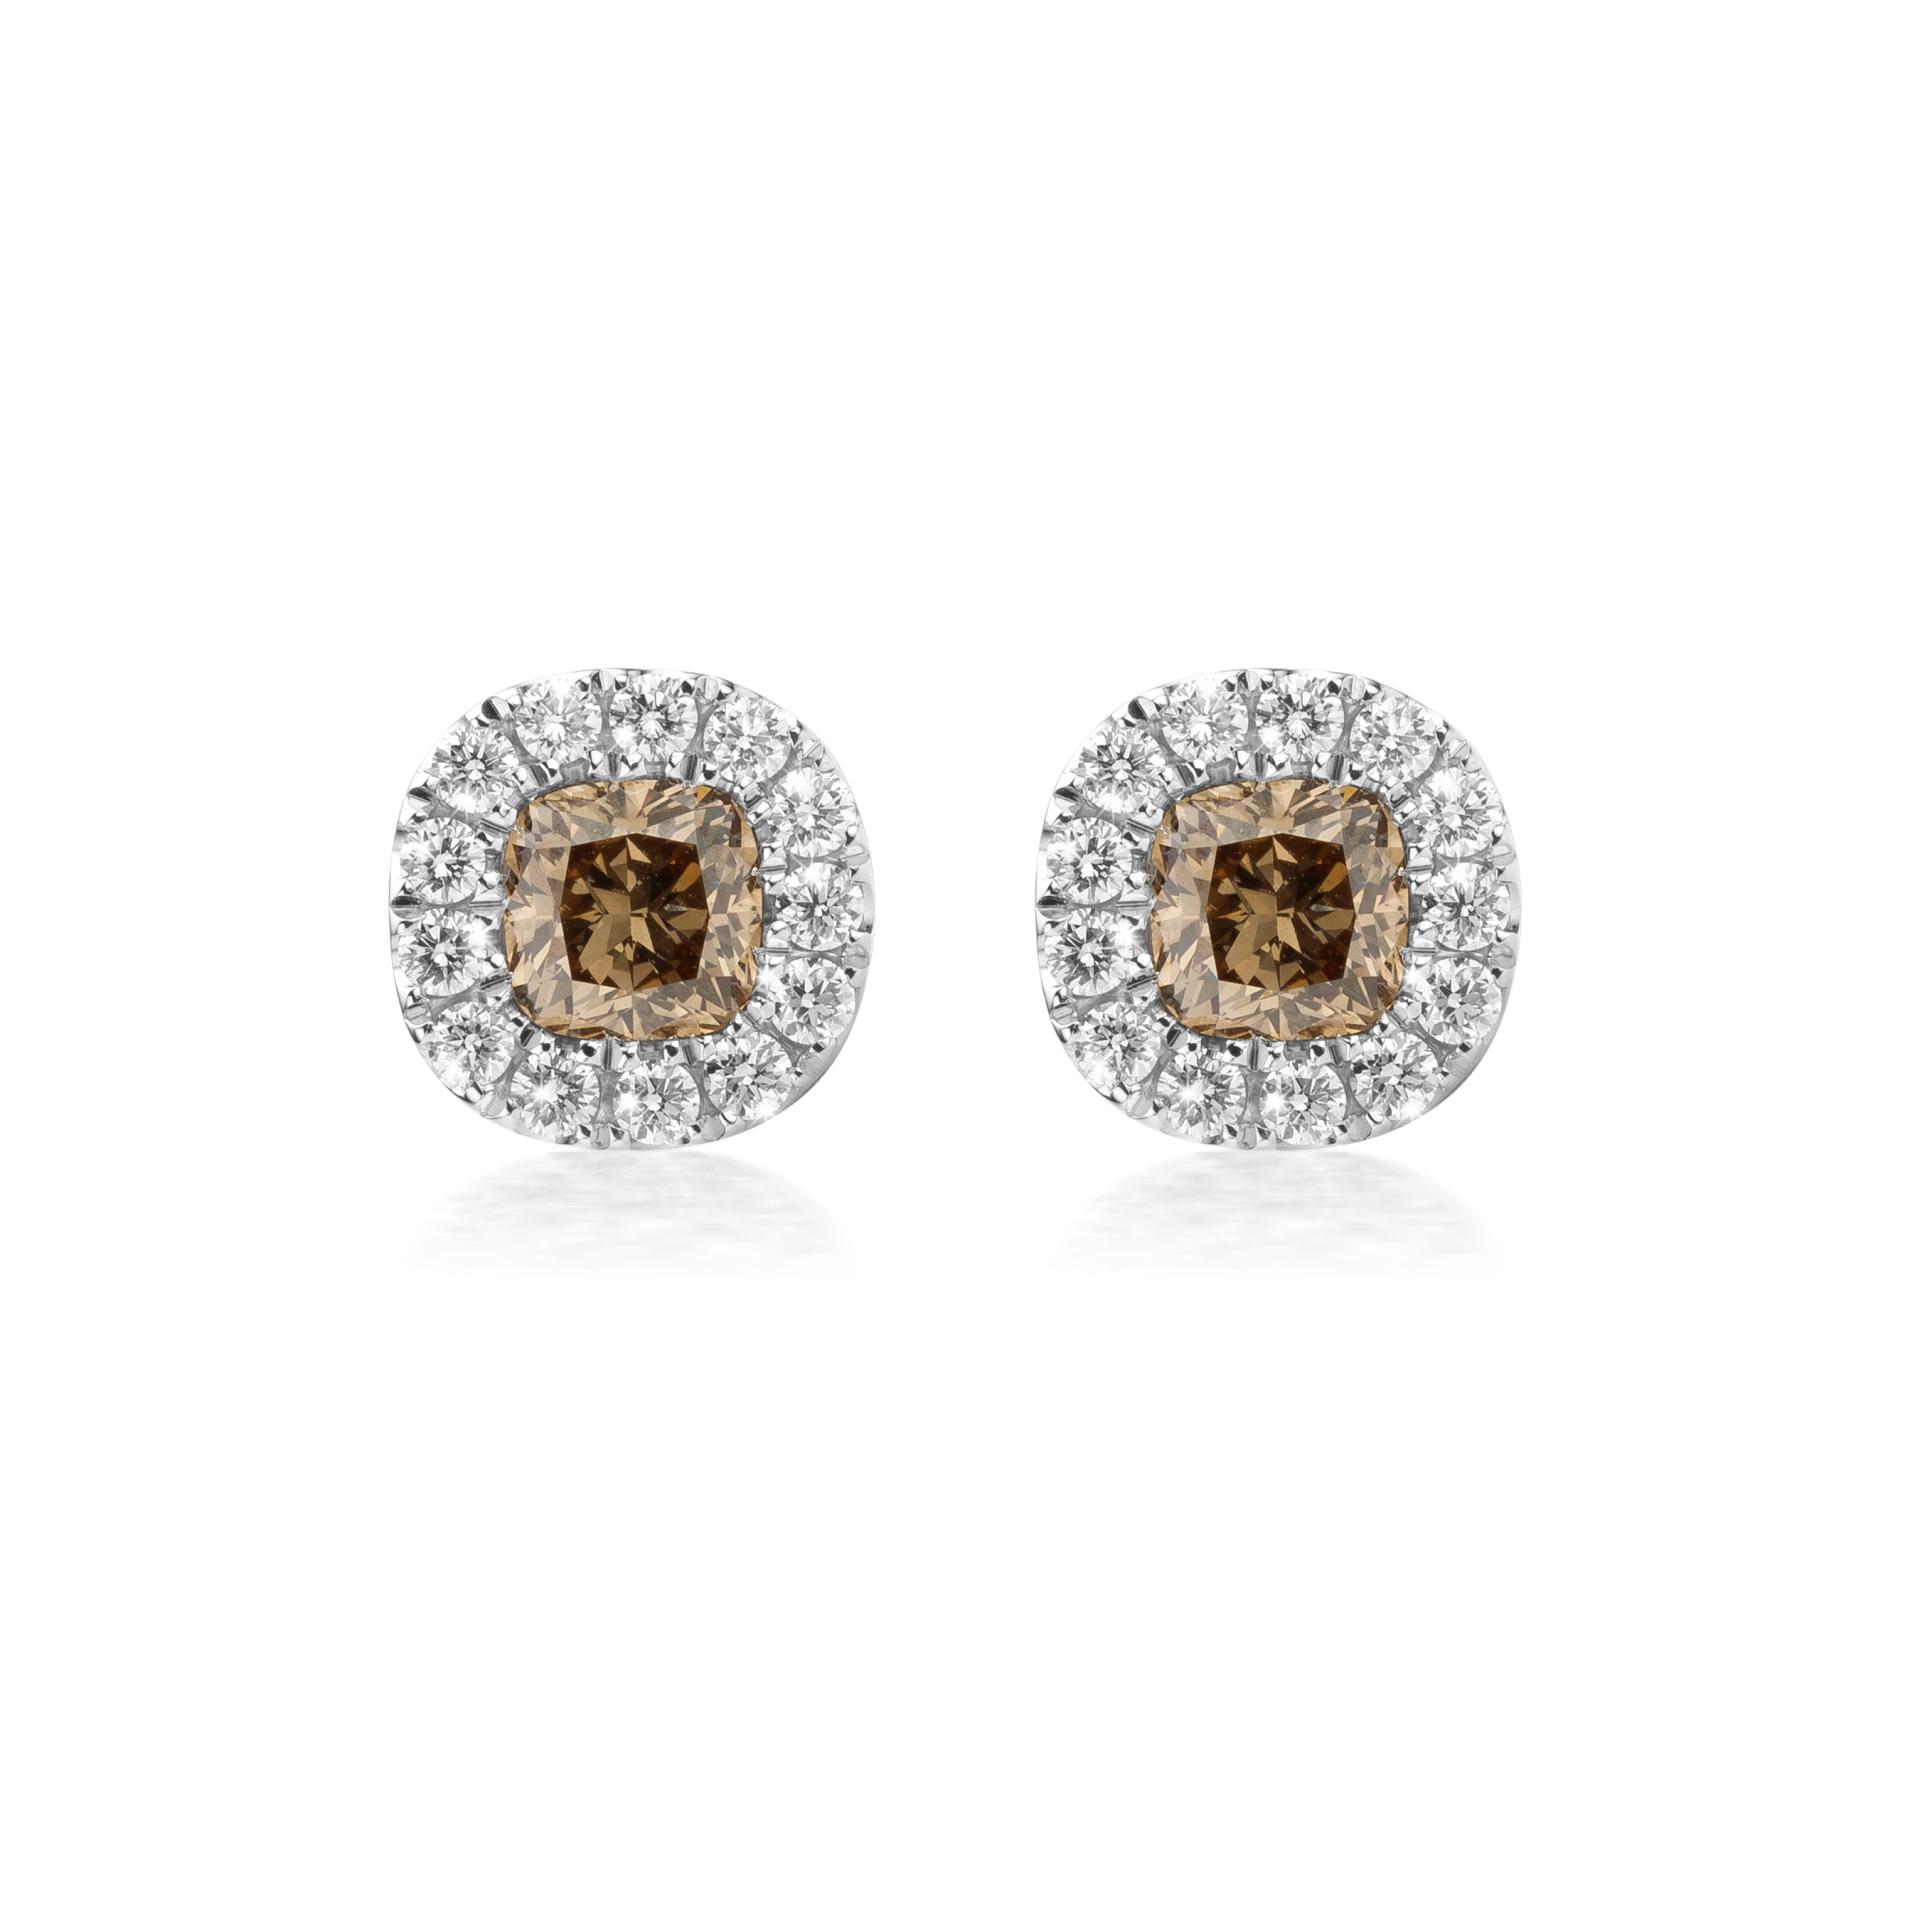 White gold earrings set with cushion cut brown diamonds and brilliant cut diamonds made by Maison De Greef